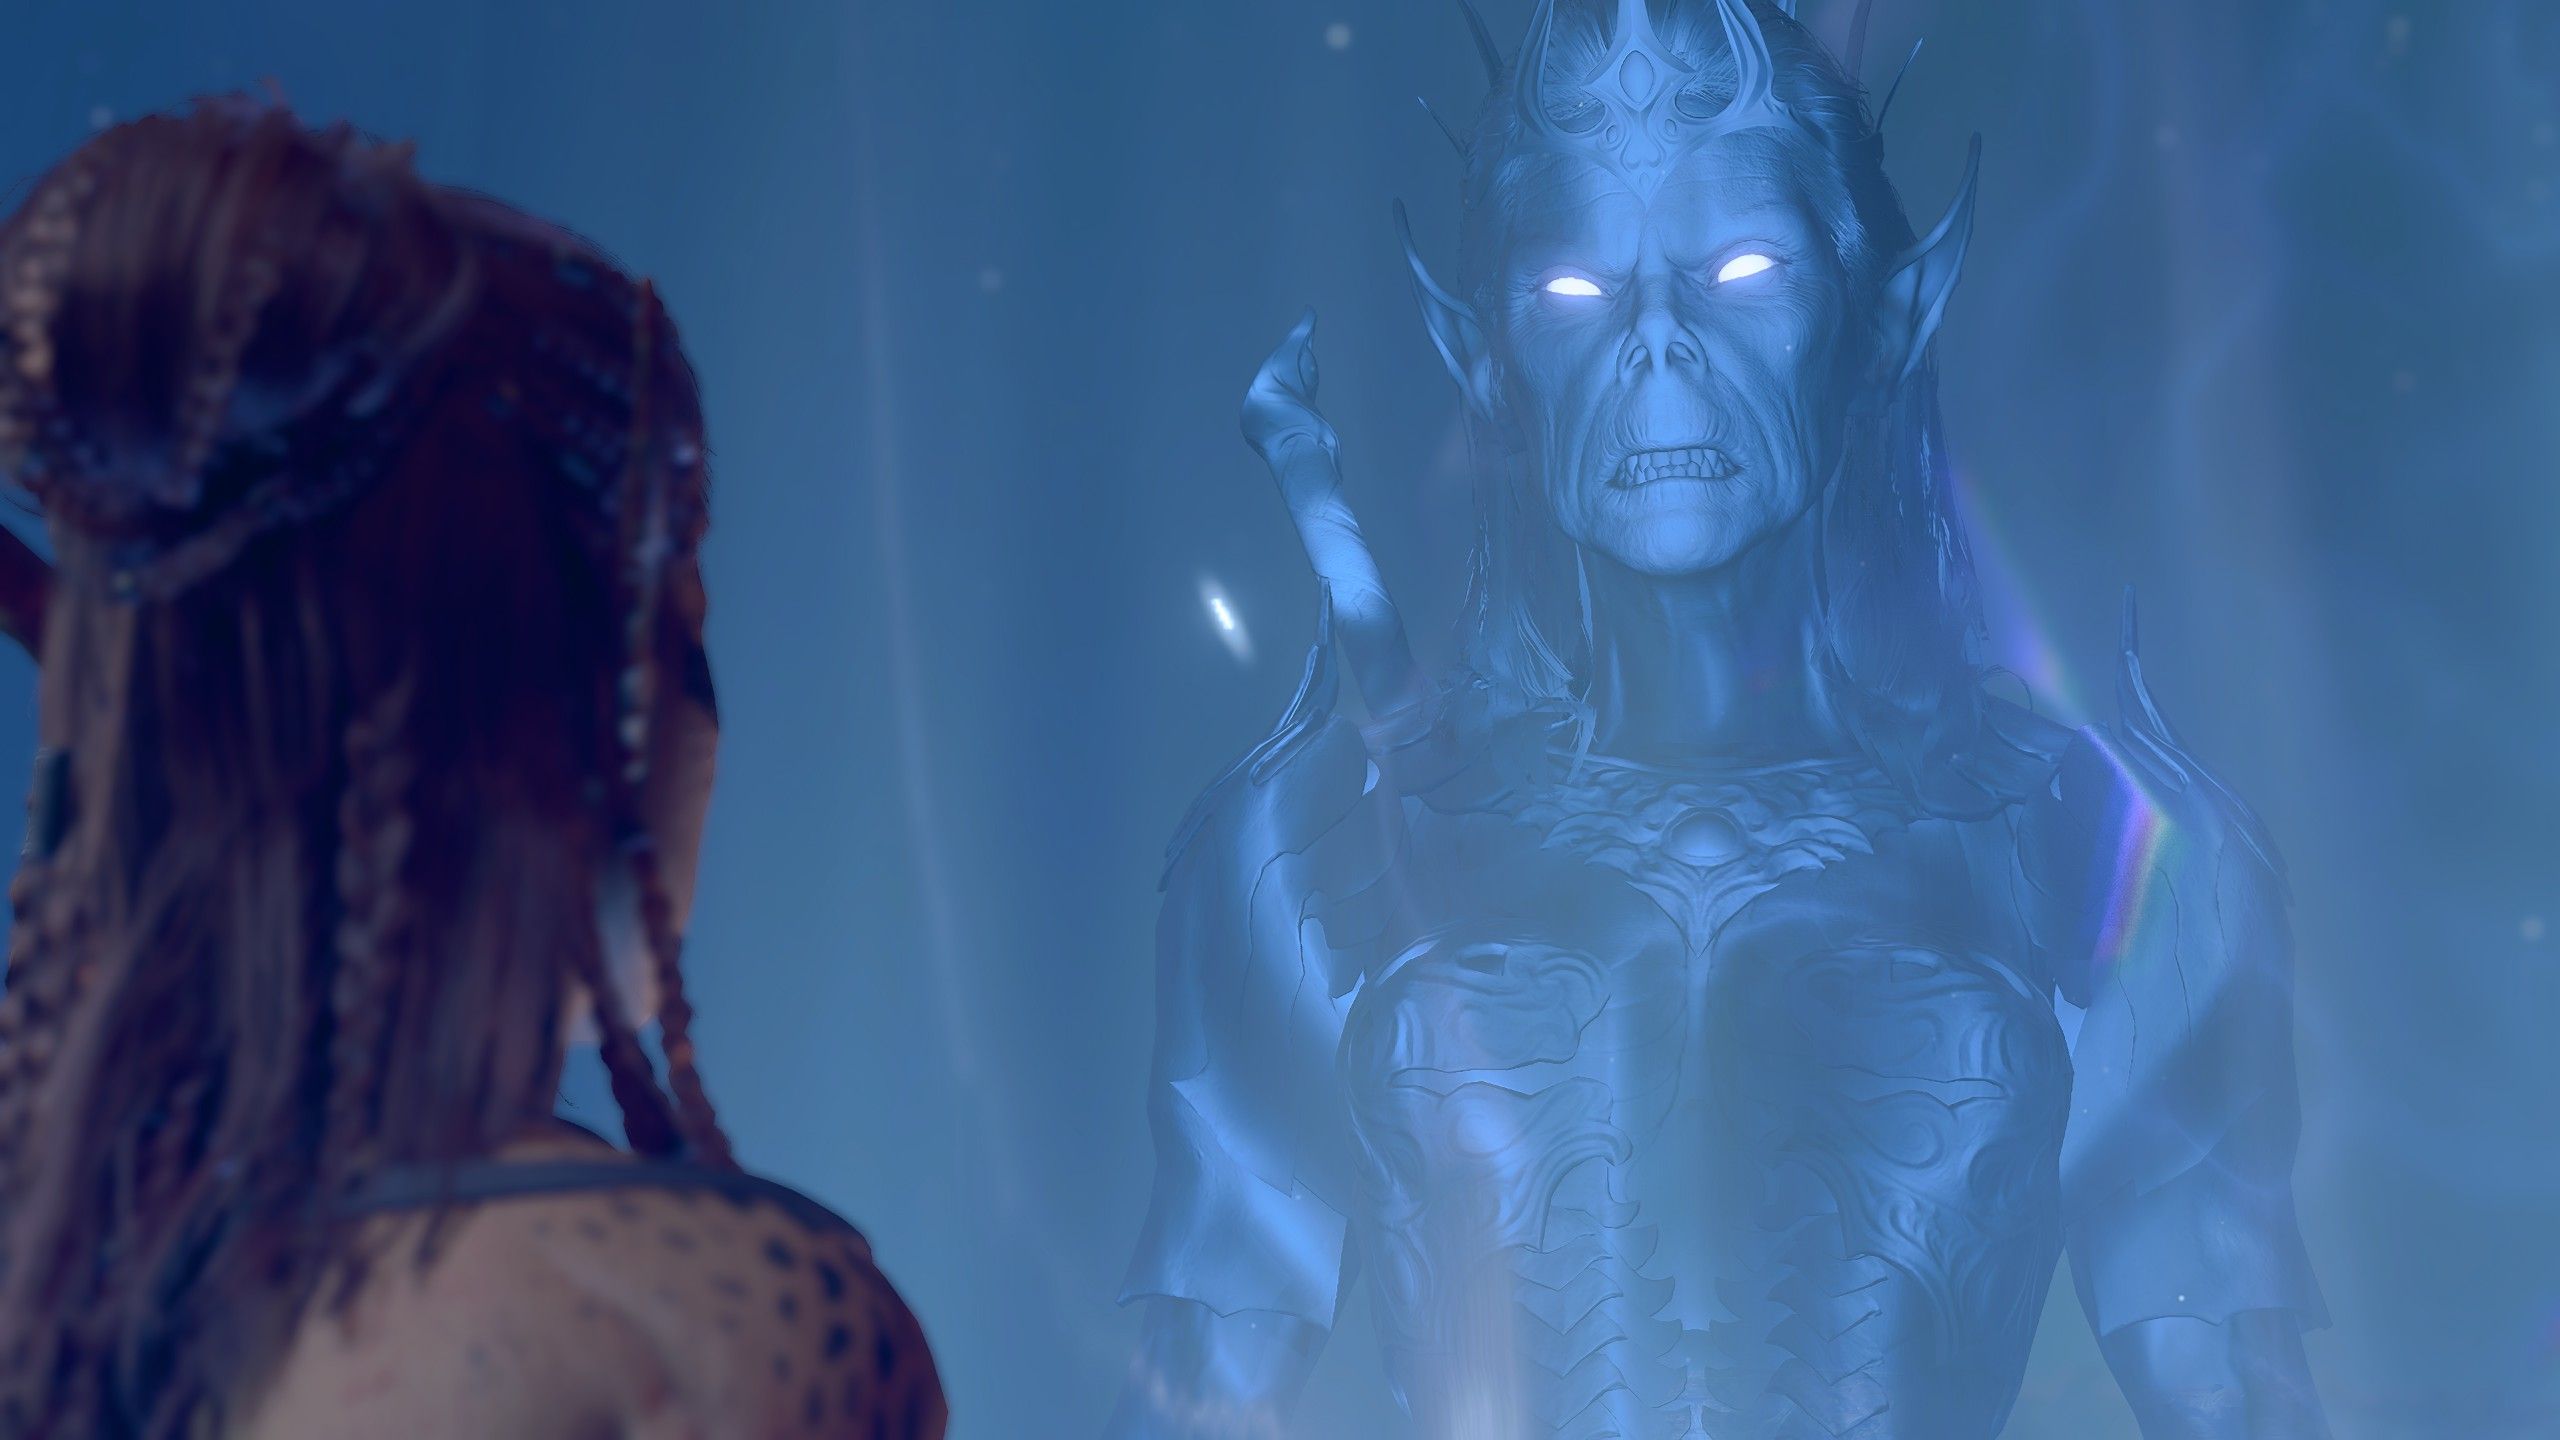 Lae'zel Gazes Up At Blue Projection Of Vlaakith In Baldur's Gate 3.